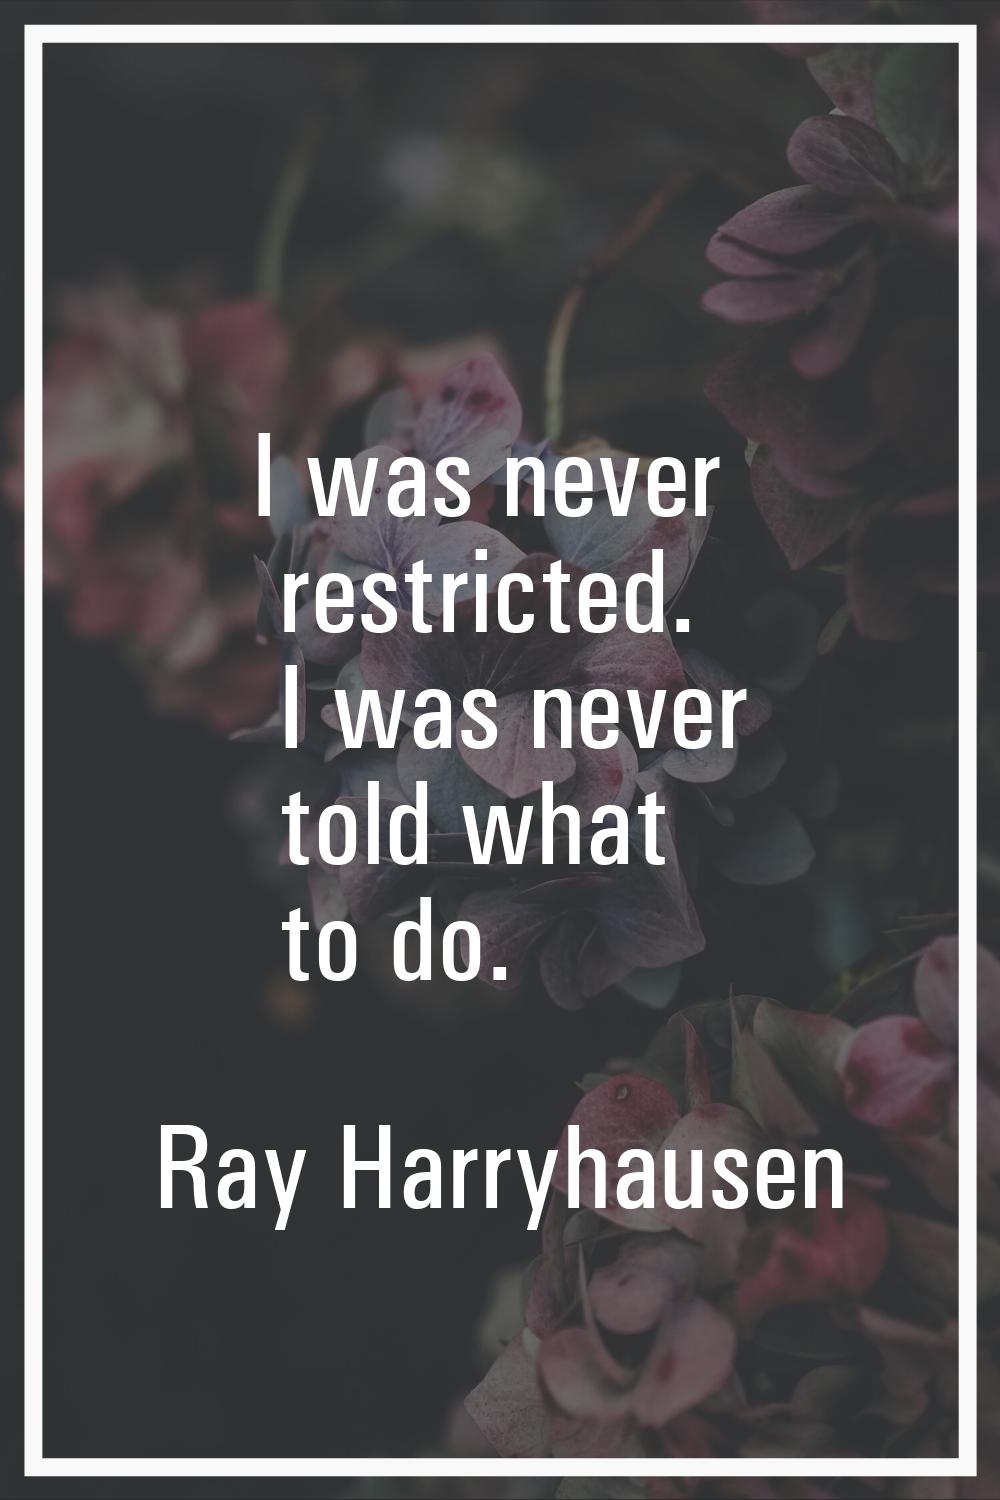 I was never restricted. I was never told what to do.